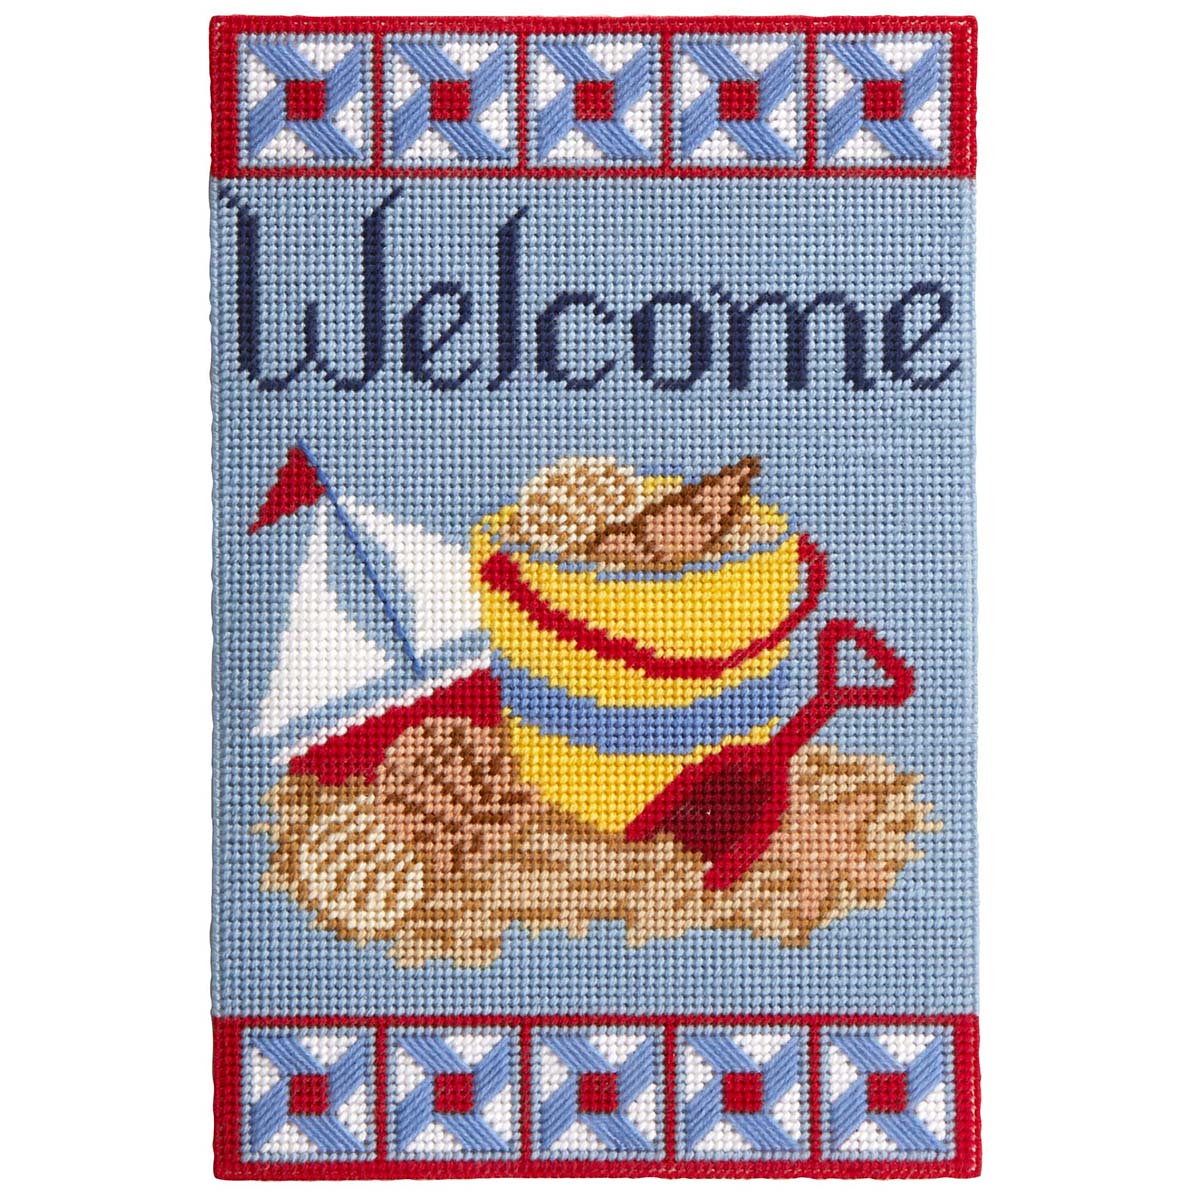 Herrschners Summer Welcome Wall Hanging Plastic Canvas Kit